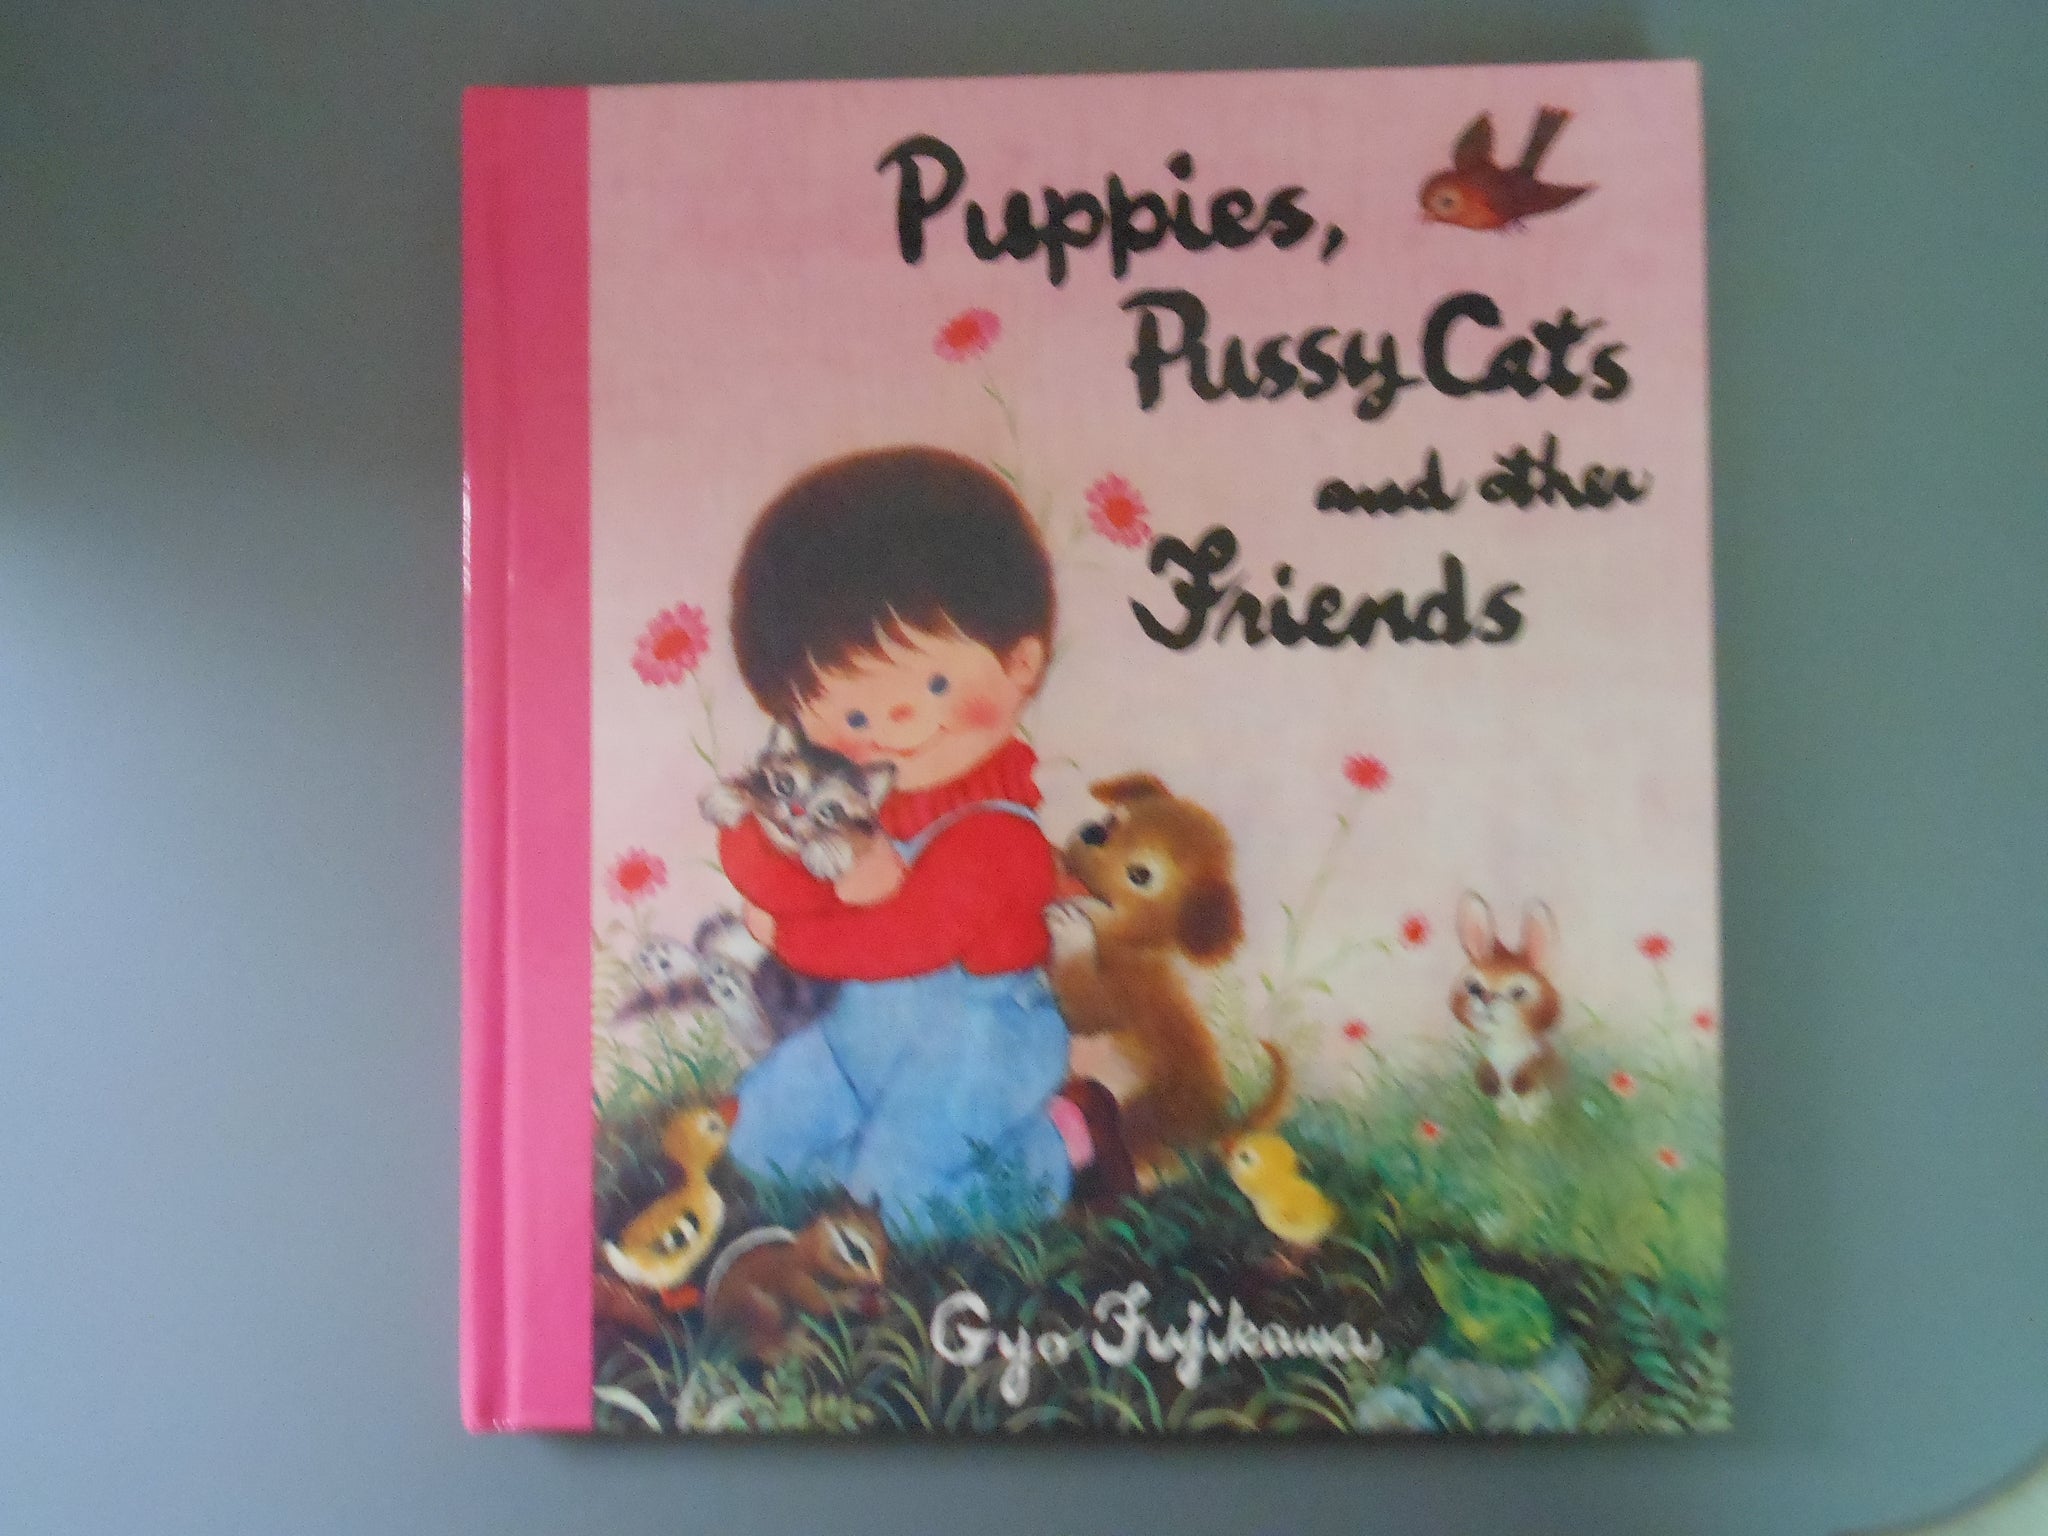 Puppies, Pussy Cats and other Friends by Gyo Fujikawa